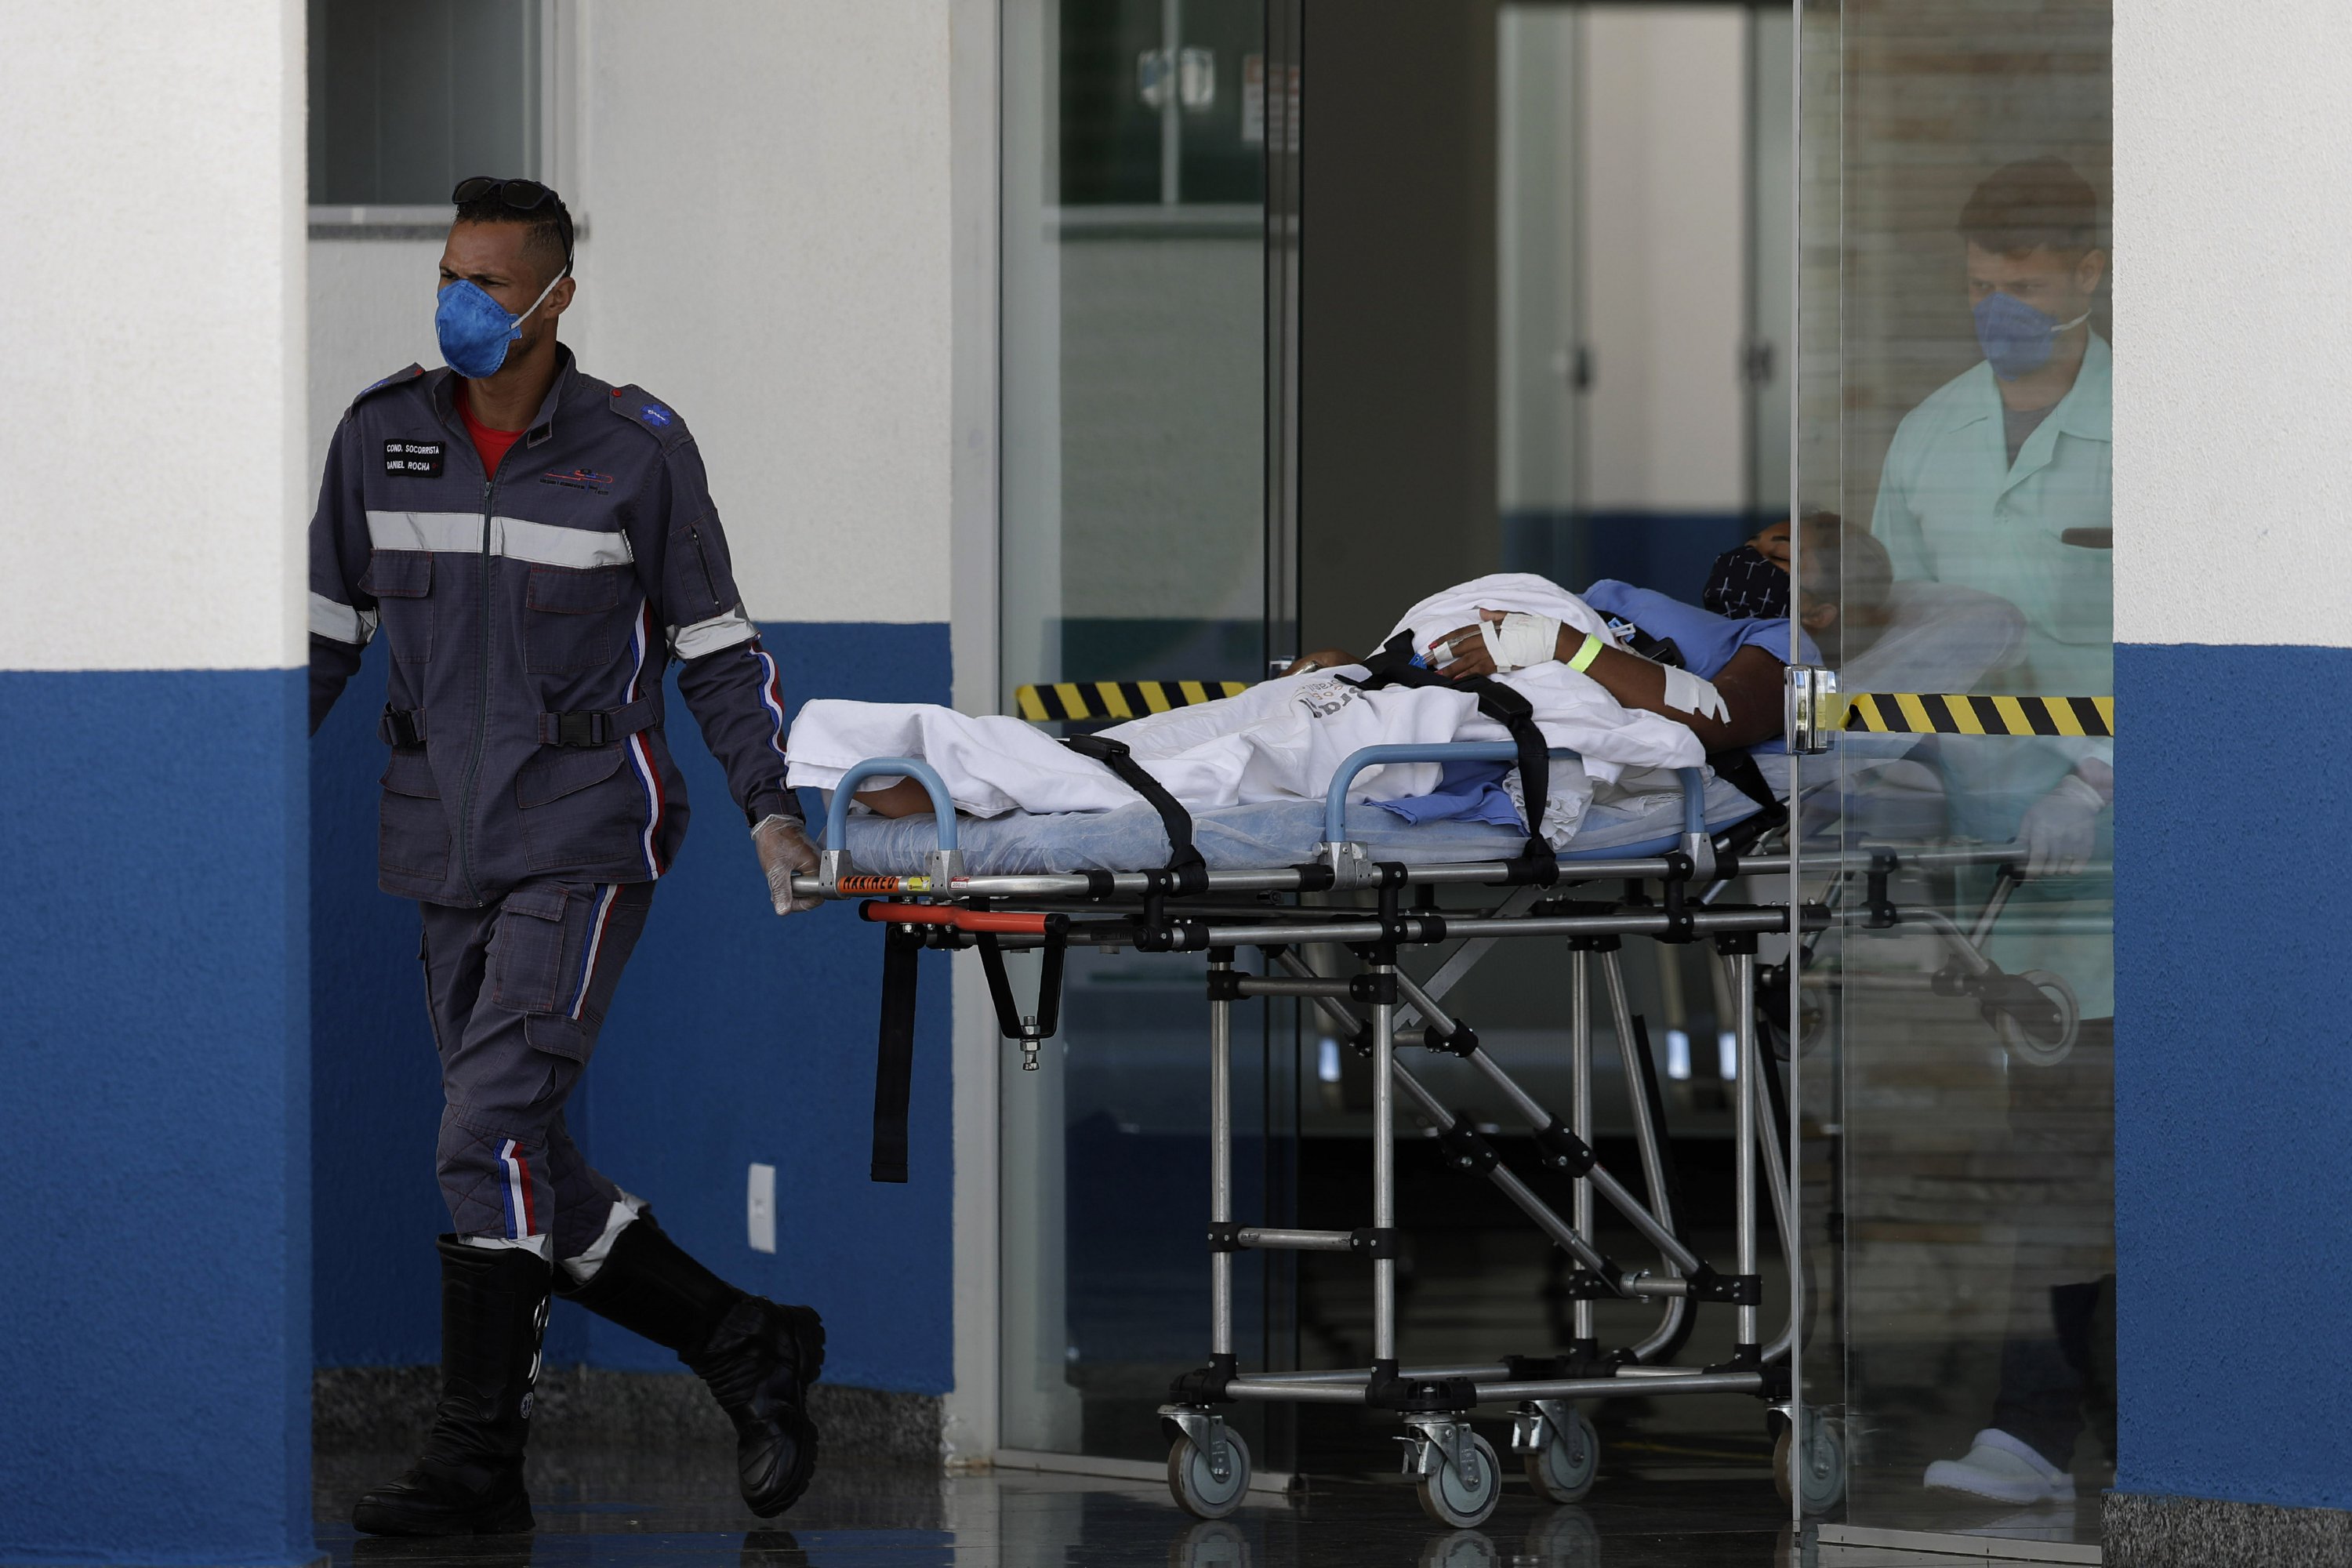 The death toll in Brazil exceeds 250,000, and the virus continues to rise